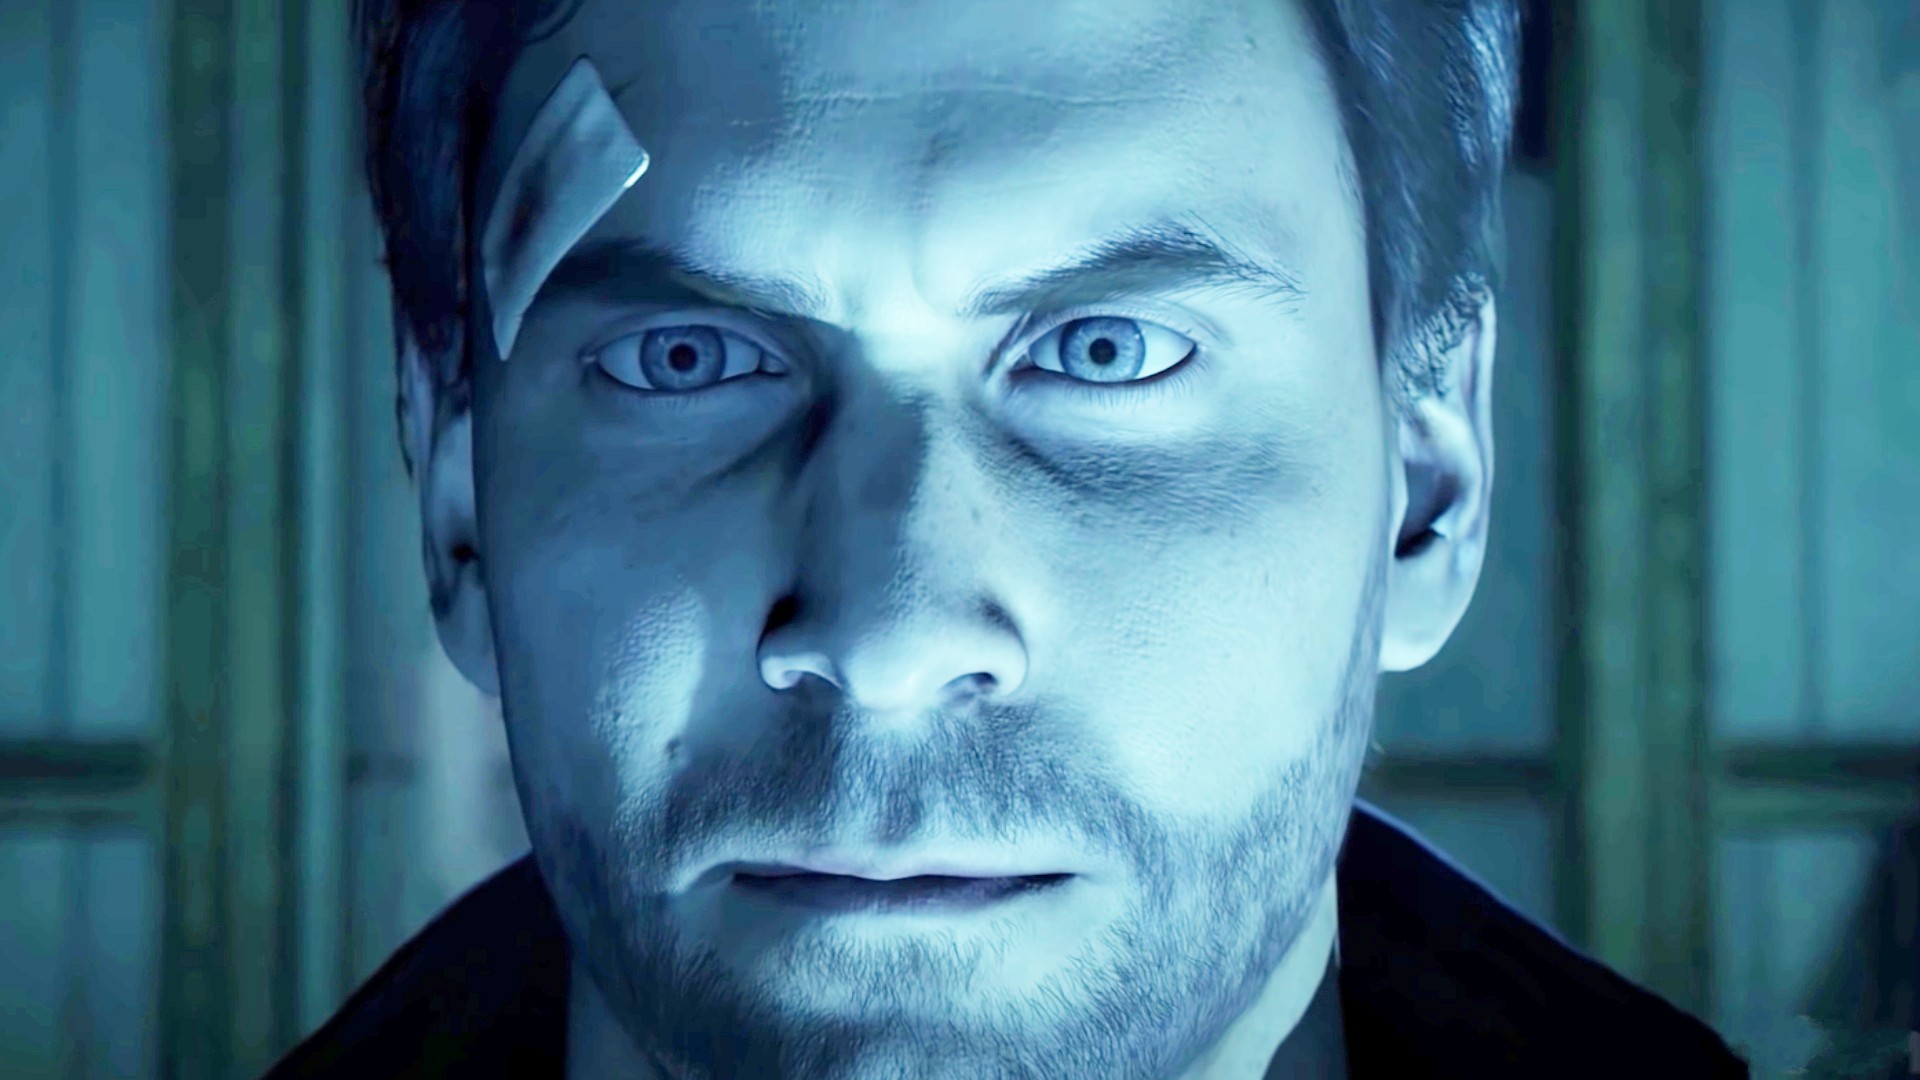 The player buys 4,000 copies of Alan Wake, and none of them work